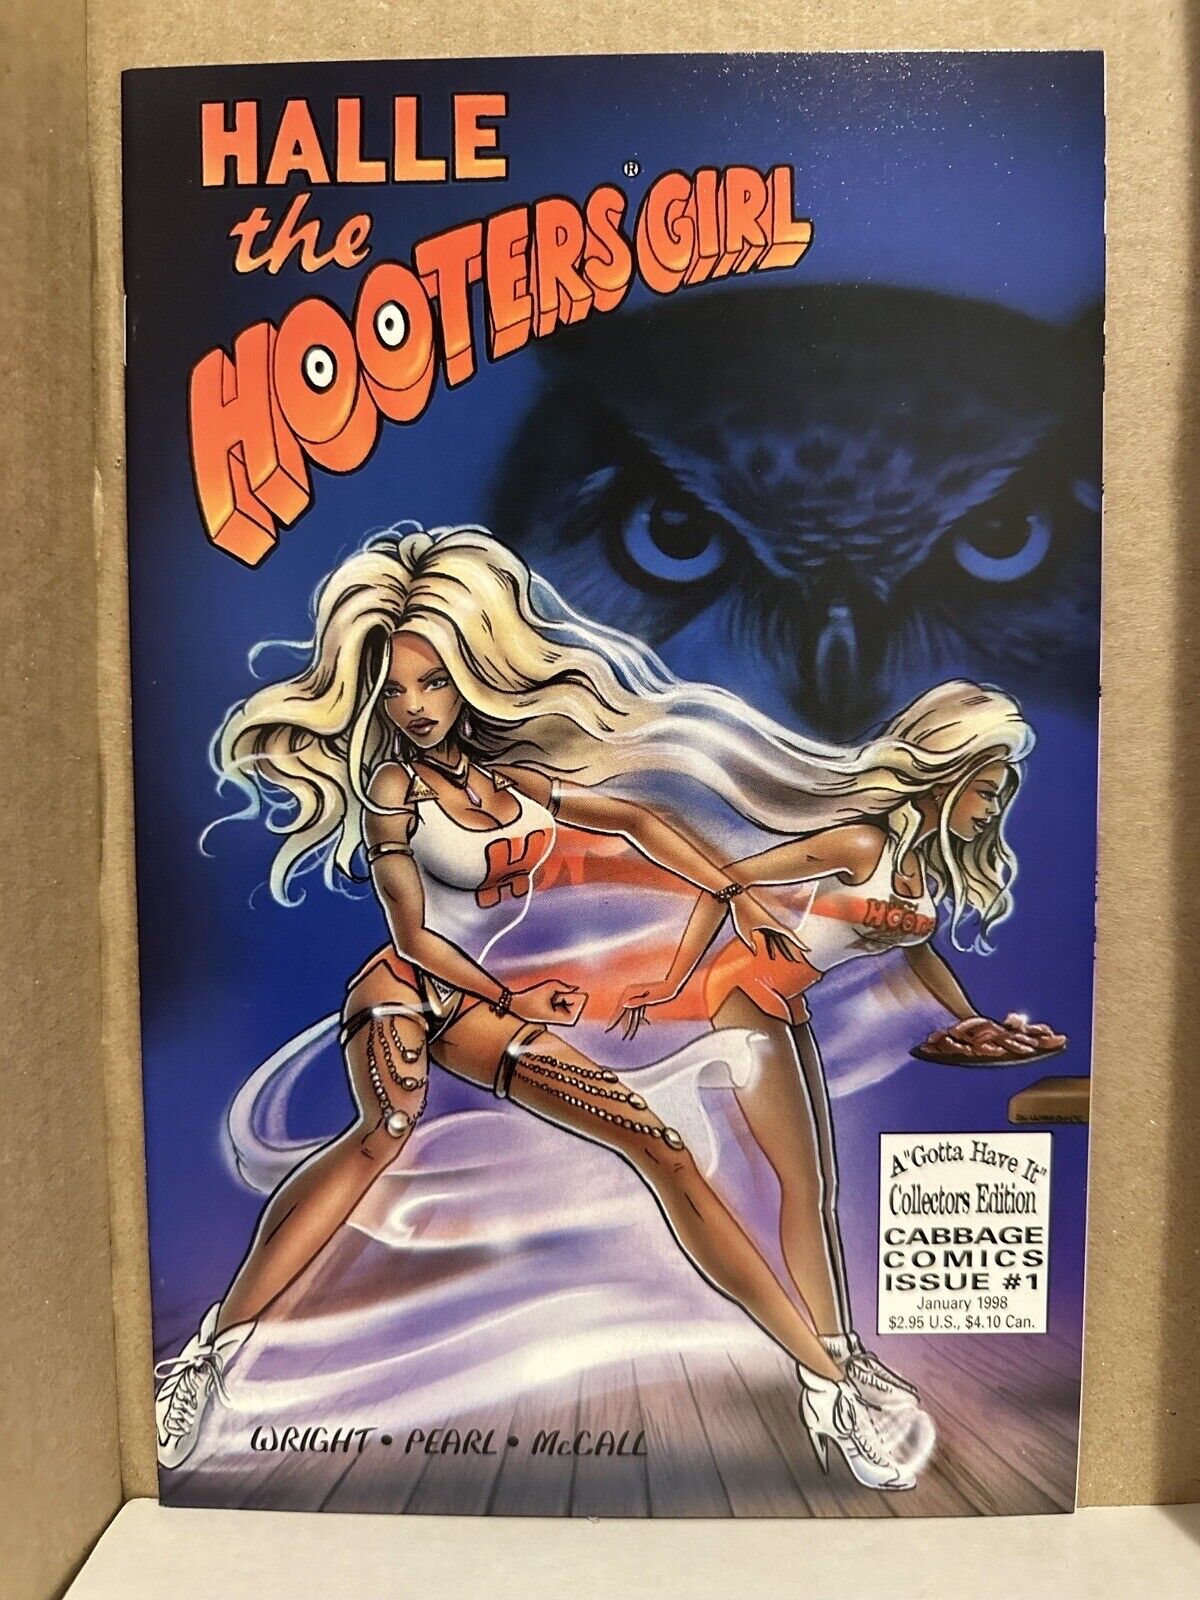 Halle the Hooters Girl #1 NM Recalled Comic, Low Print (1998)